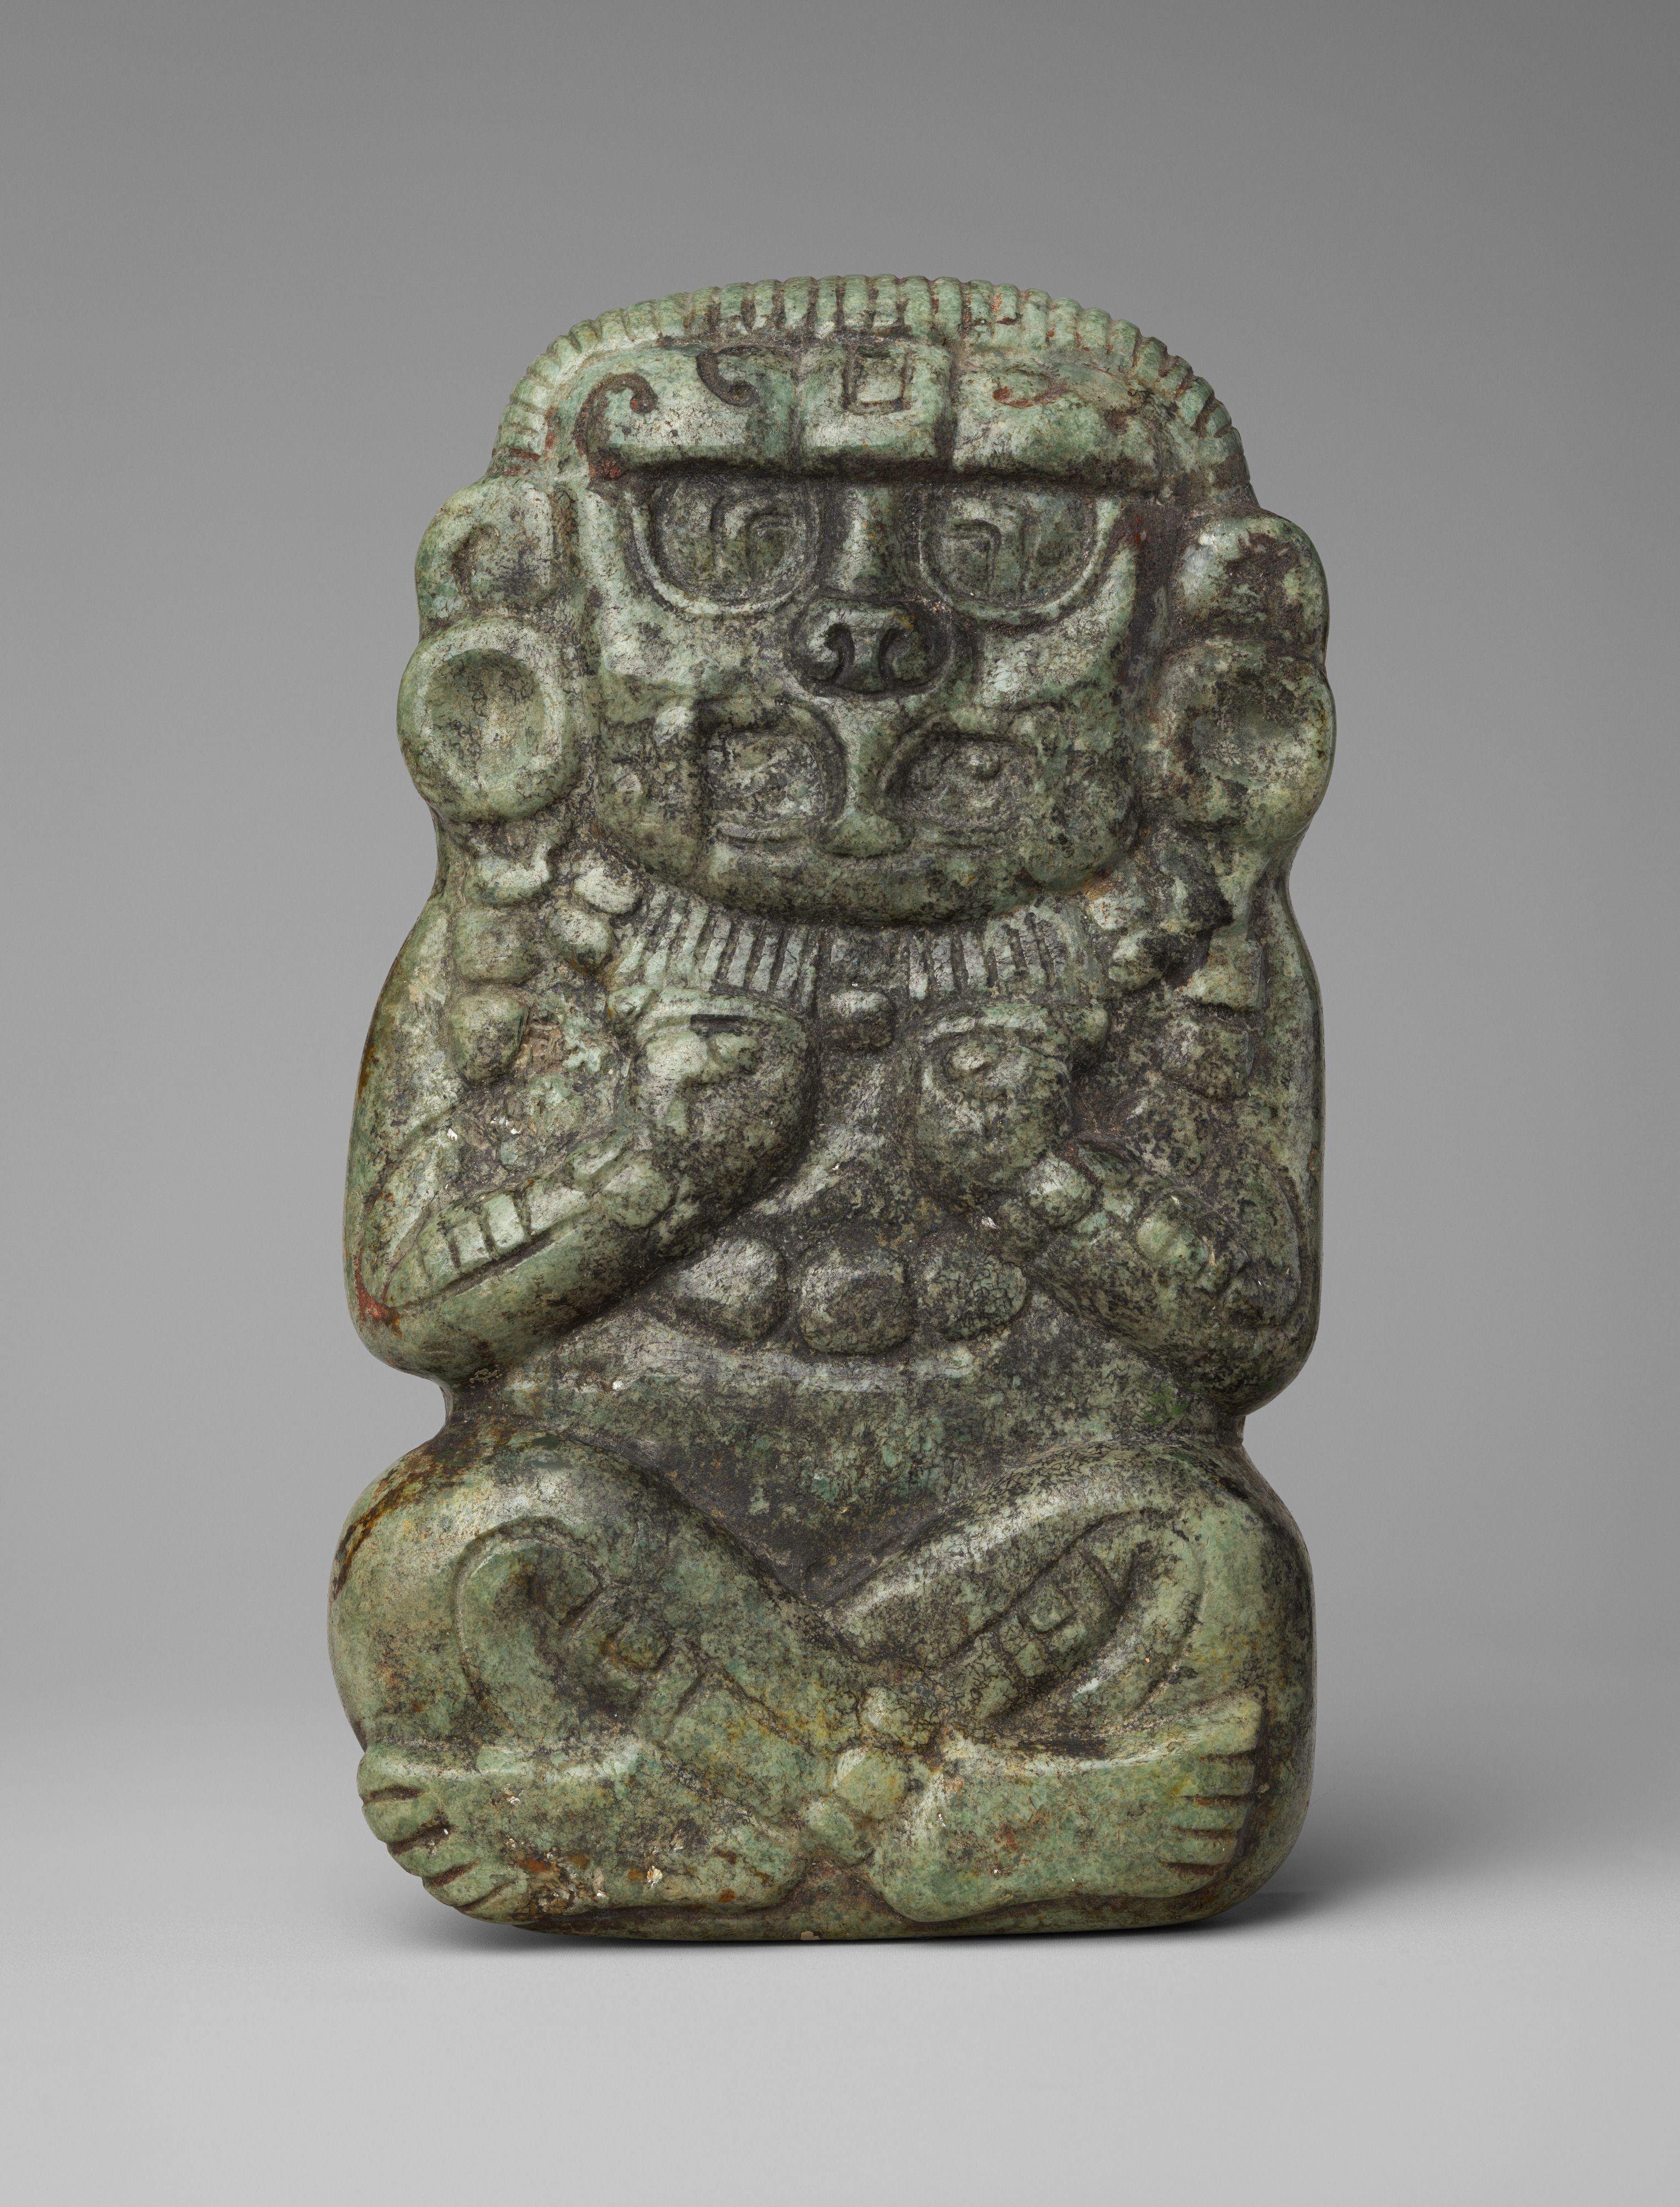 A Mayan jade carving of a deity. The figure is seated crosslegged with its hands up to its chest. Their face has avian features. The figure wears ear gauges, necklaces, bracelets, and anklets.